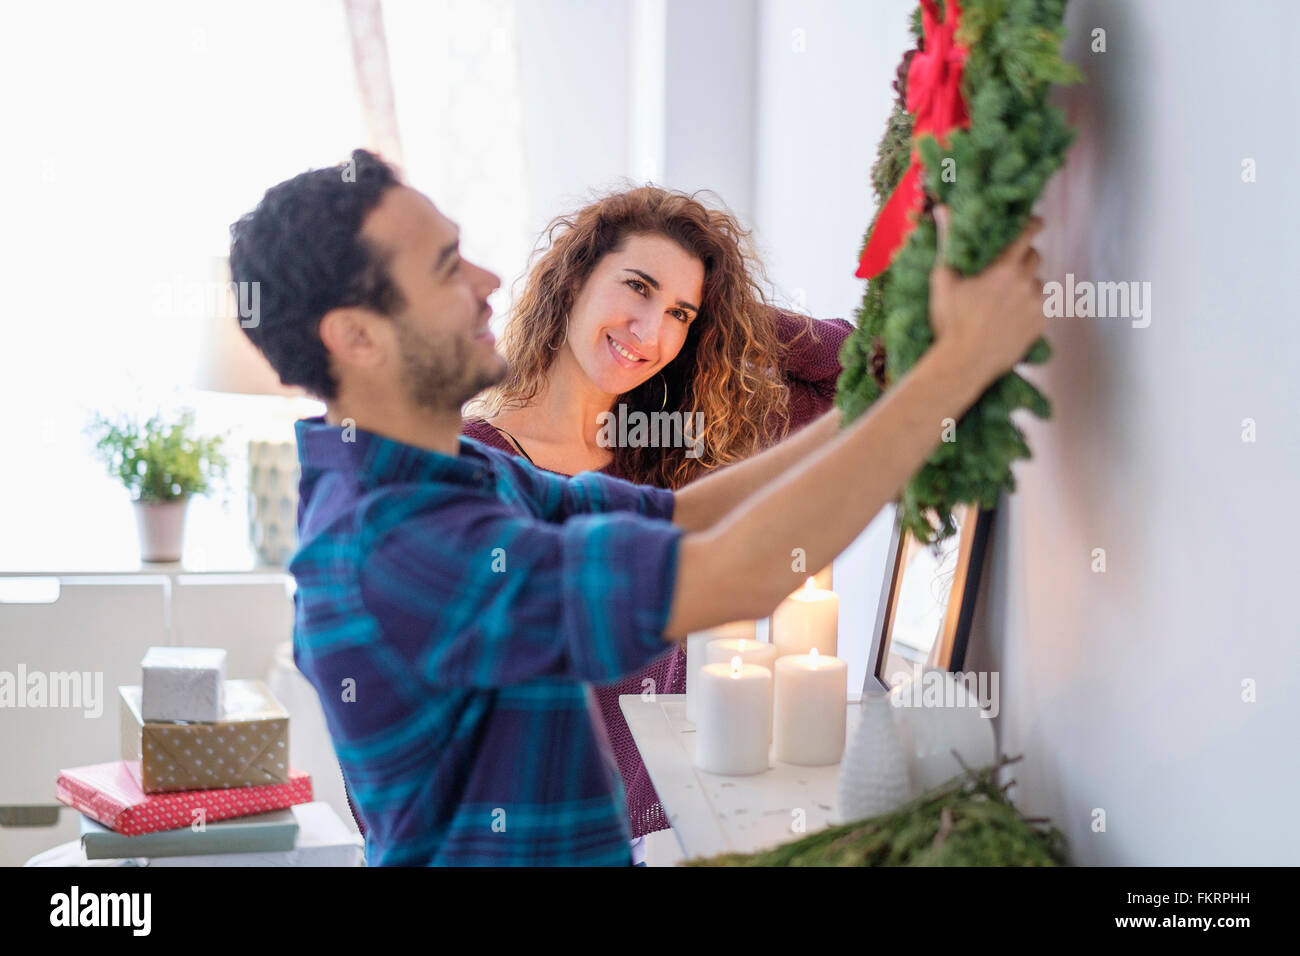 Couple hanging Christmas wreath Banque D'Images